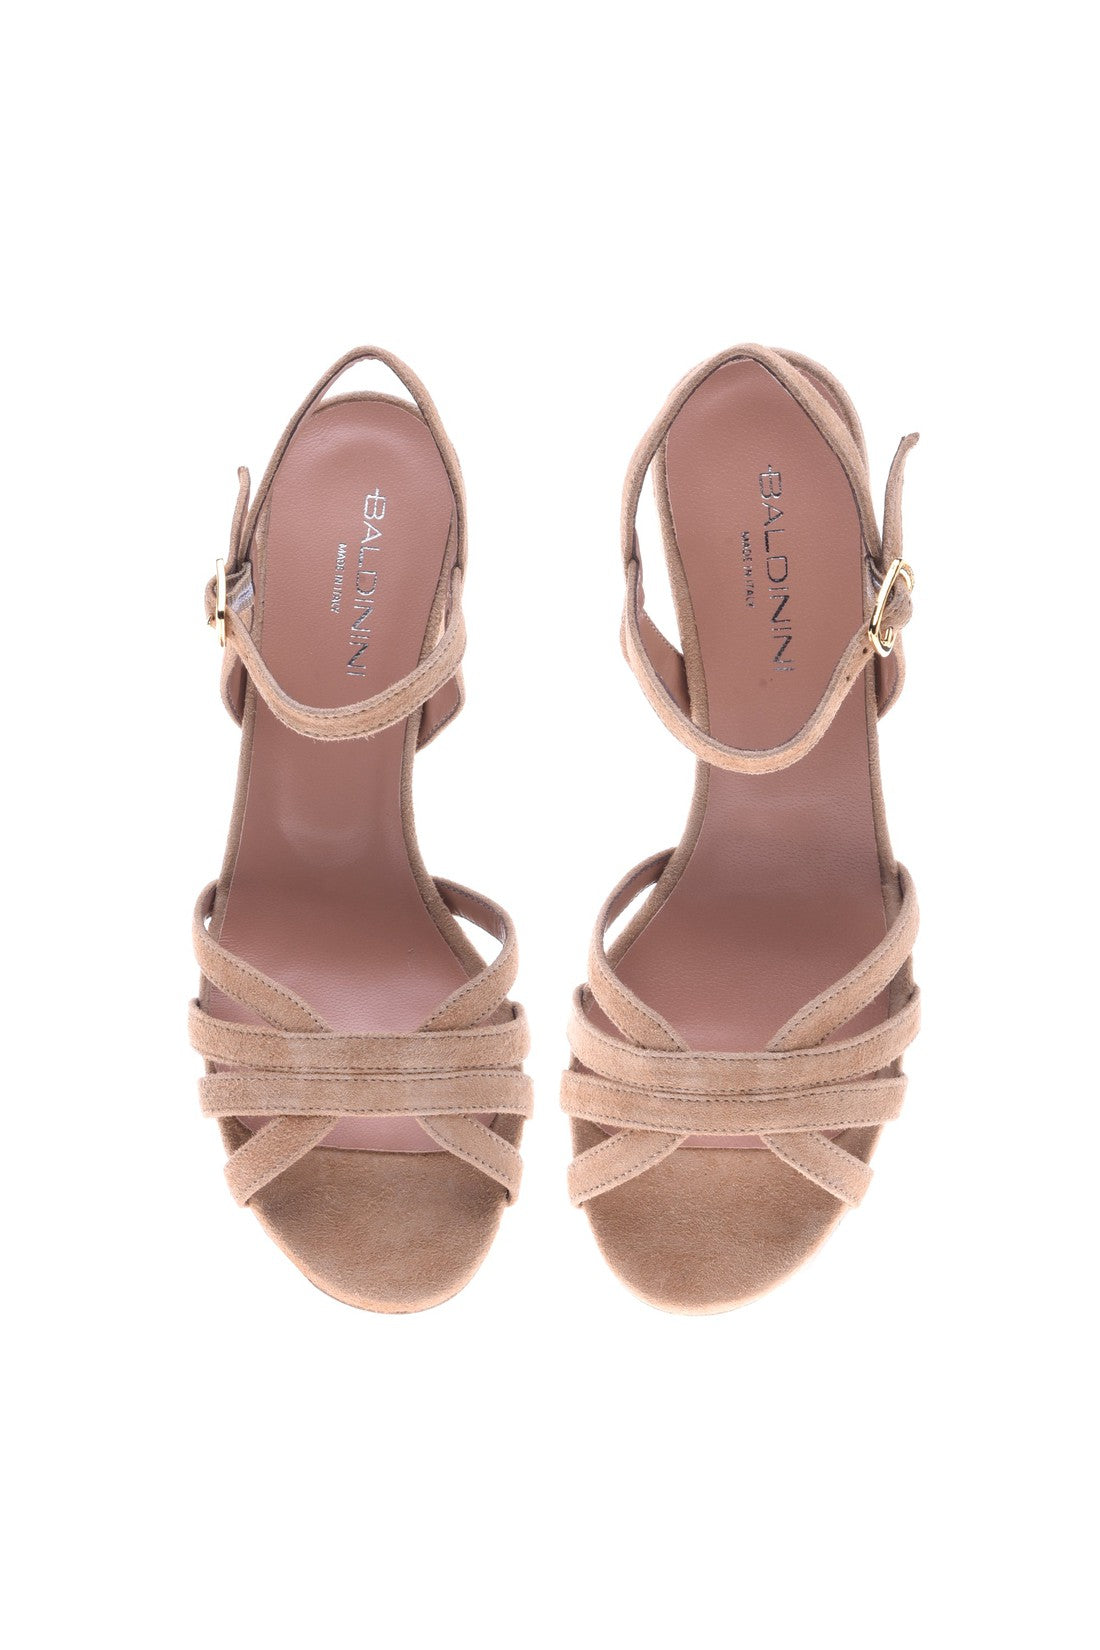 BALDININI-OUTLET-SALE-Sandal-in-taupe-suede-Sandalen-ARCHIVE-COLLECTION-2_52384c2c-69fb-4323-87ca-8b2c95a47bd6.jpg